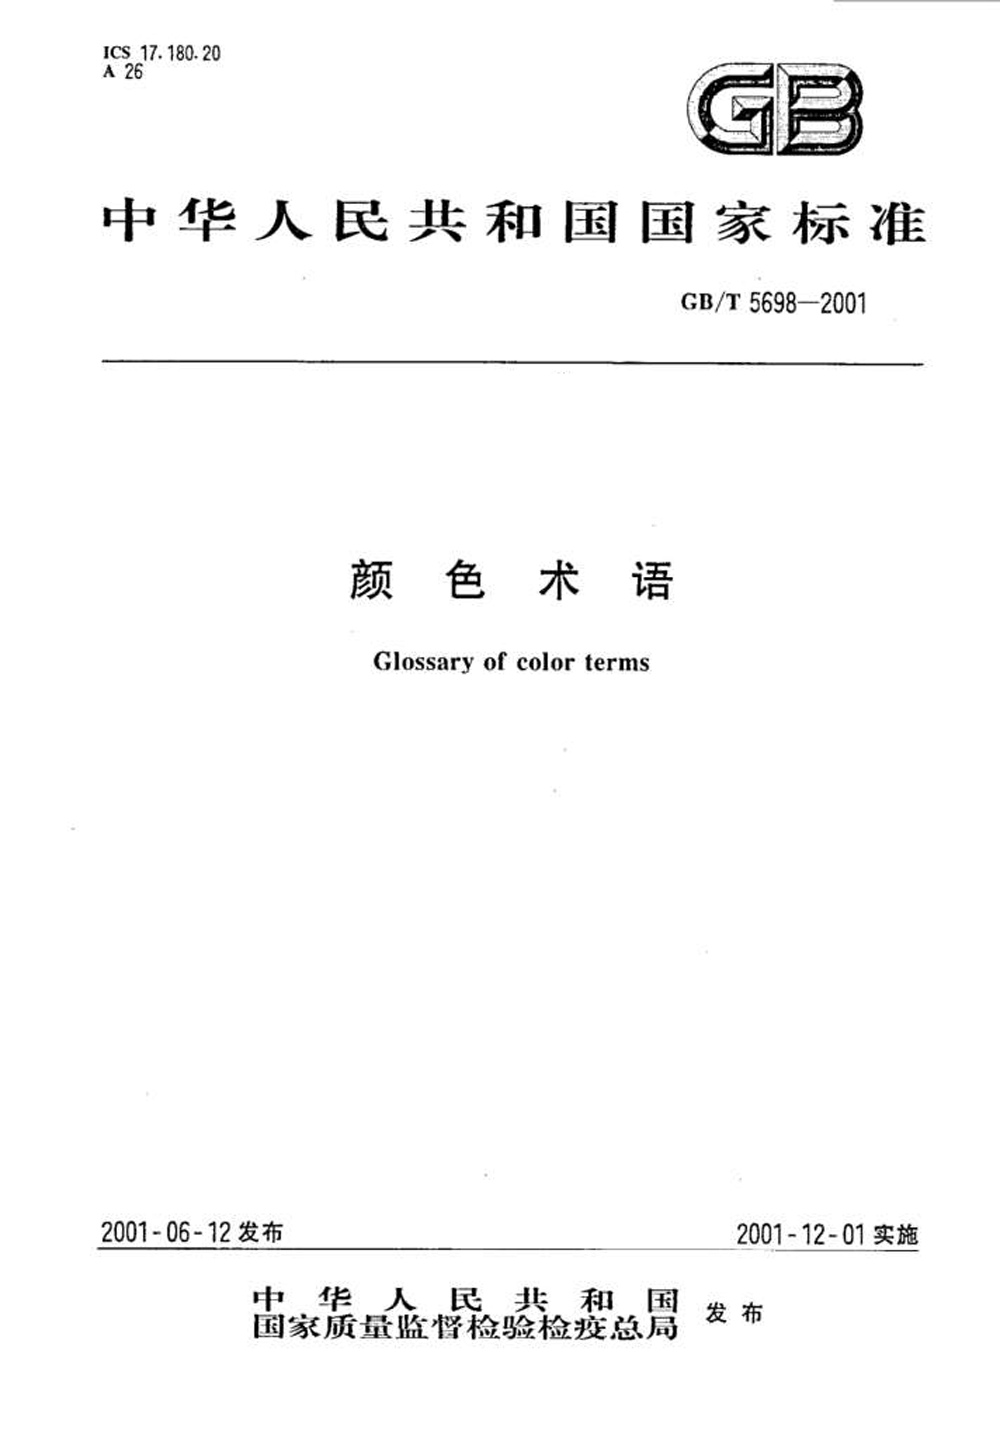 GB/T 5698-2001 《颜色术语》《Glossary of color terms》